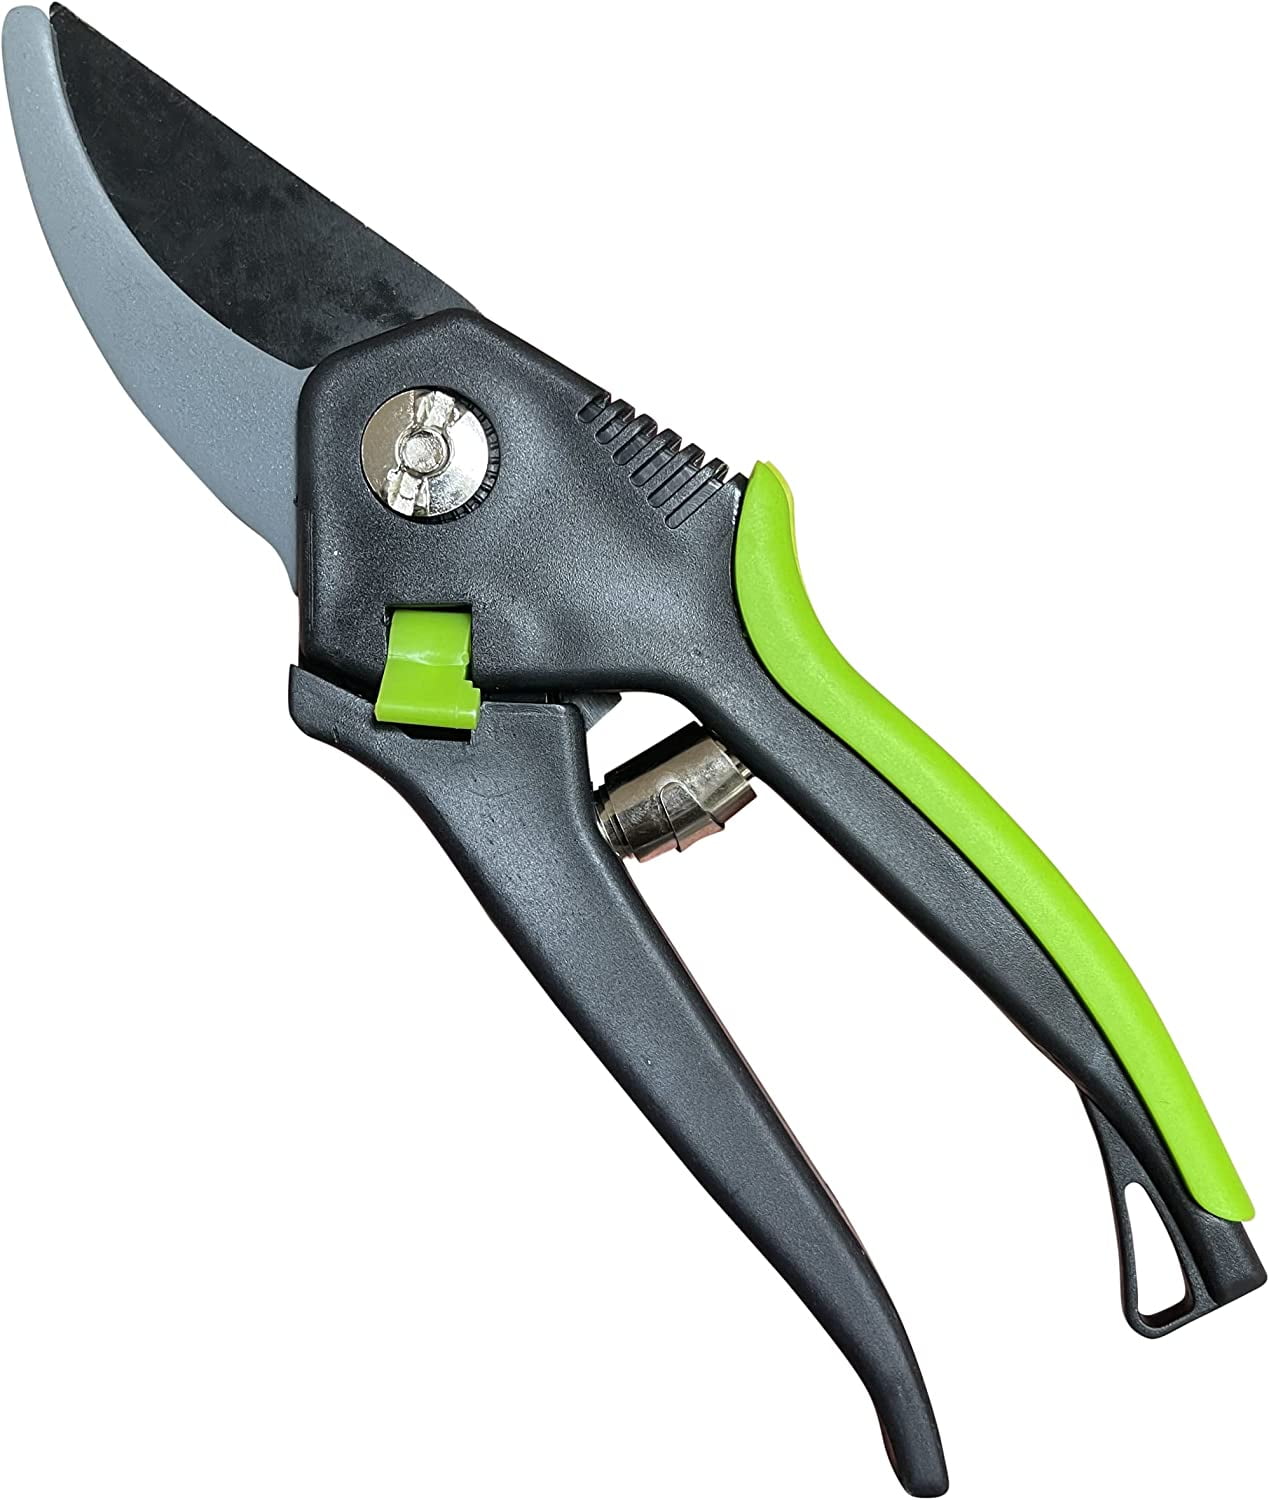 Garden Guru Hedge Shears Clippers for Trimming, 15 inch High Carbon Steel  Hedge Clippers with Comfort Grip Handle 